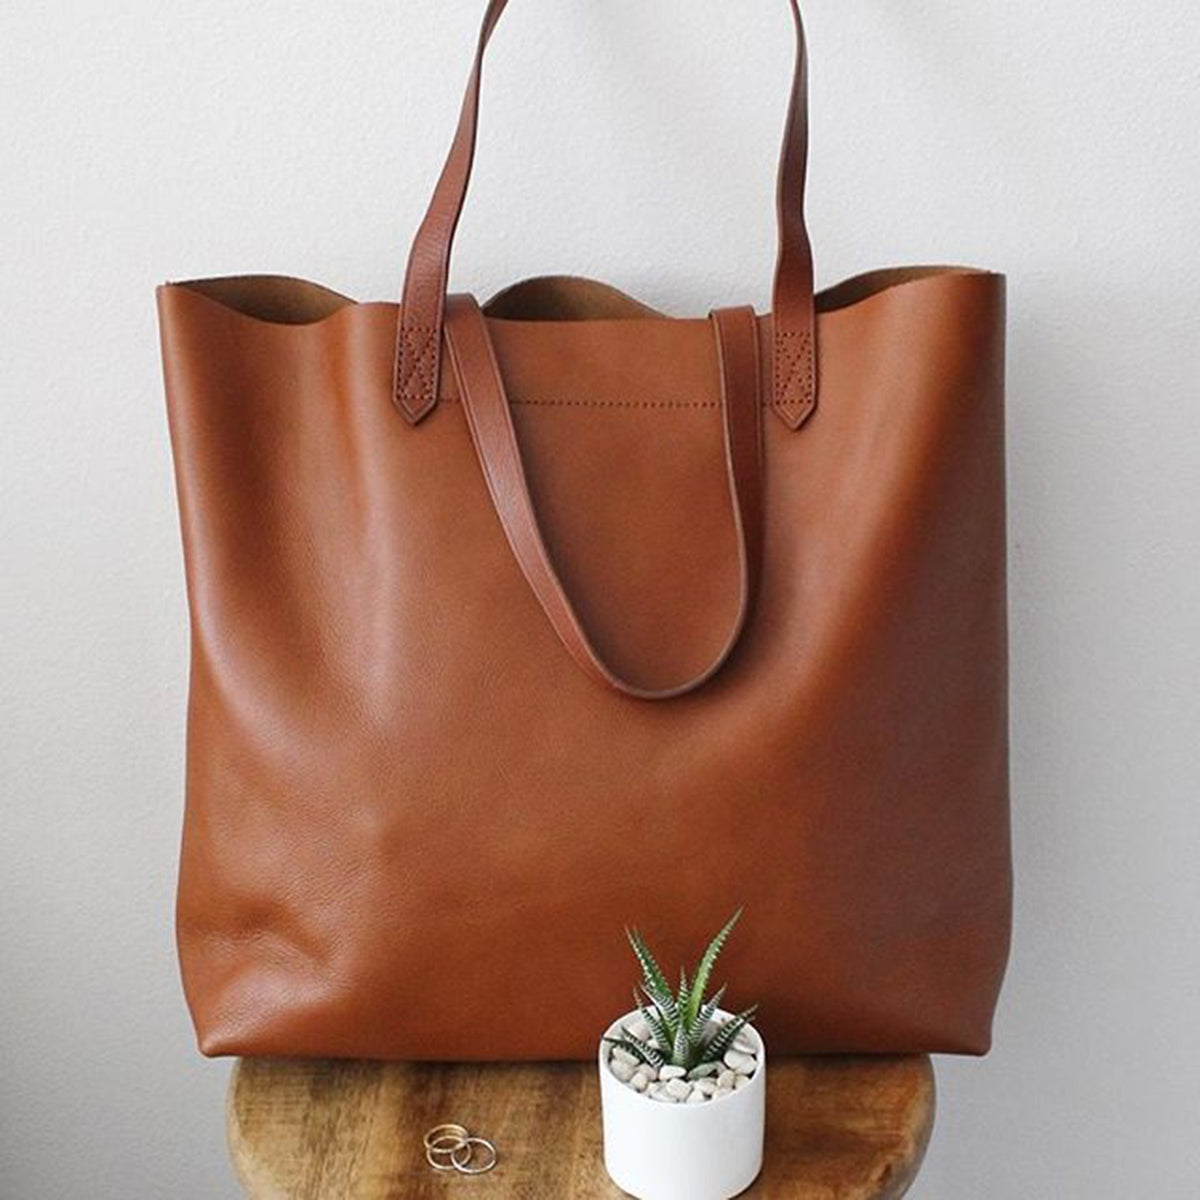 Oversized Tote Bag for Women: Black & Brown Leather Totes | Worthtryit ...